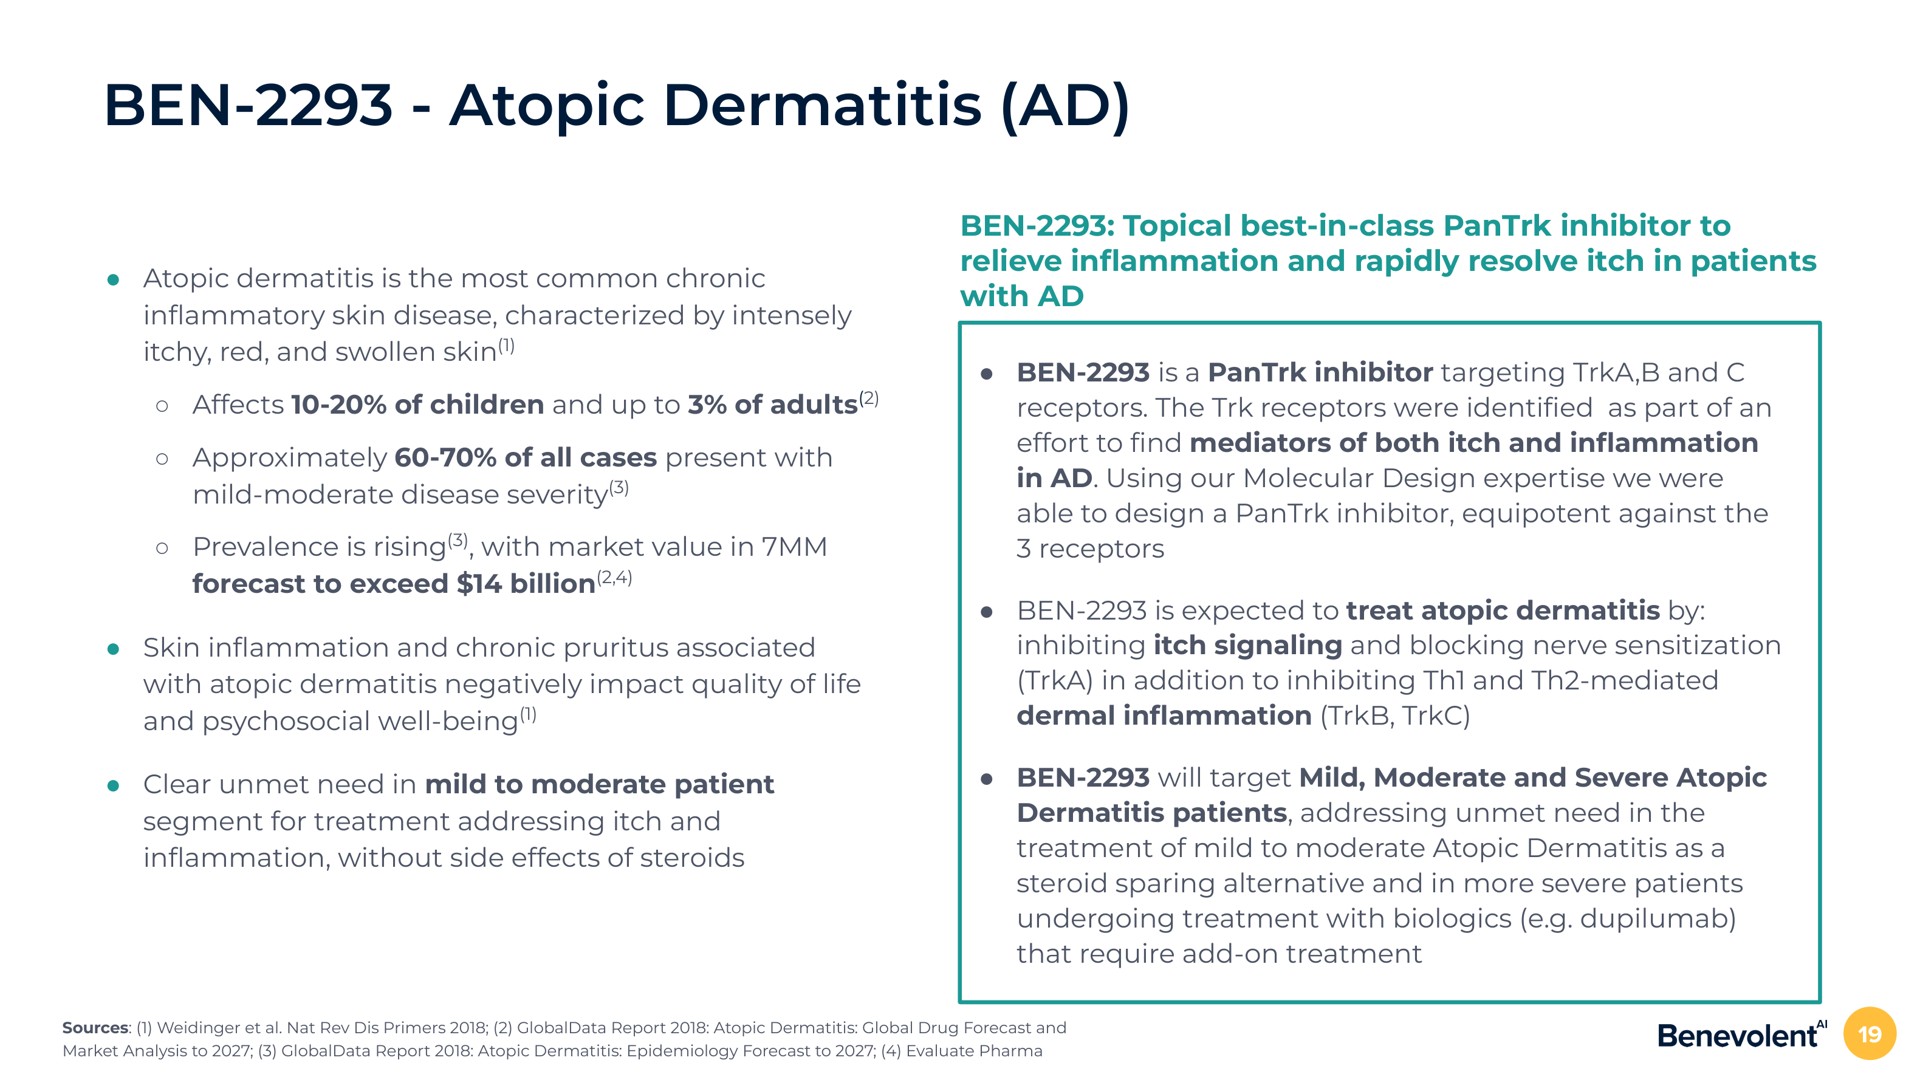 ben atopic dermatitis atopic dermatitis is the most common chronic in skin disease characterized by intensely itchy red and swollen skin affects of children and up to of adults approximately of all cases present with mild moderate disease severity prevalence is rising with market value in forecast to exceed billion skin in and chronic pruritus associated with atopic dermatitis negatively impact quality of life and psychosocial well being clear unmet need in mild to moderate patient segment for treatment addressing itch and in without side effects of steroids ben topical best in class inhibitor to relieve in and rapidly resolve itch in patients with ben is a inhibitor targeting and receptors the receptors were as part of an effort to mediators of both itch and in in using our molecular design we were able to design a inhibitor equipotent against the receptors ben is expected to treat atopic dermatitis by inhibiting itch signaling and blocking nerve sensitization in addition to inhibiting and mediated dermal in ben will target mild moderate and severe atopic dermatitis patients addressing unmet need in the treatment of mild to moderate atopic dermatitis as a steroid sparing alternative and in more severe patients undergoing treatment with that require add on treatment | BenevolentAI